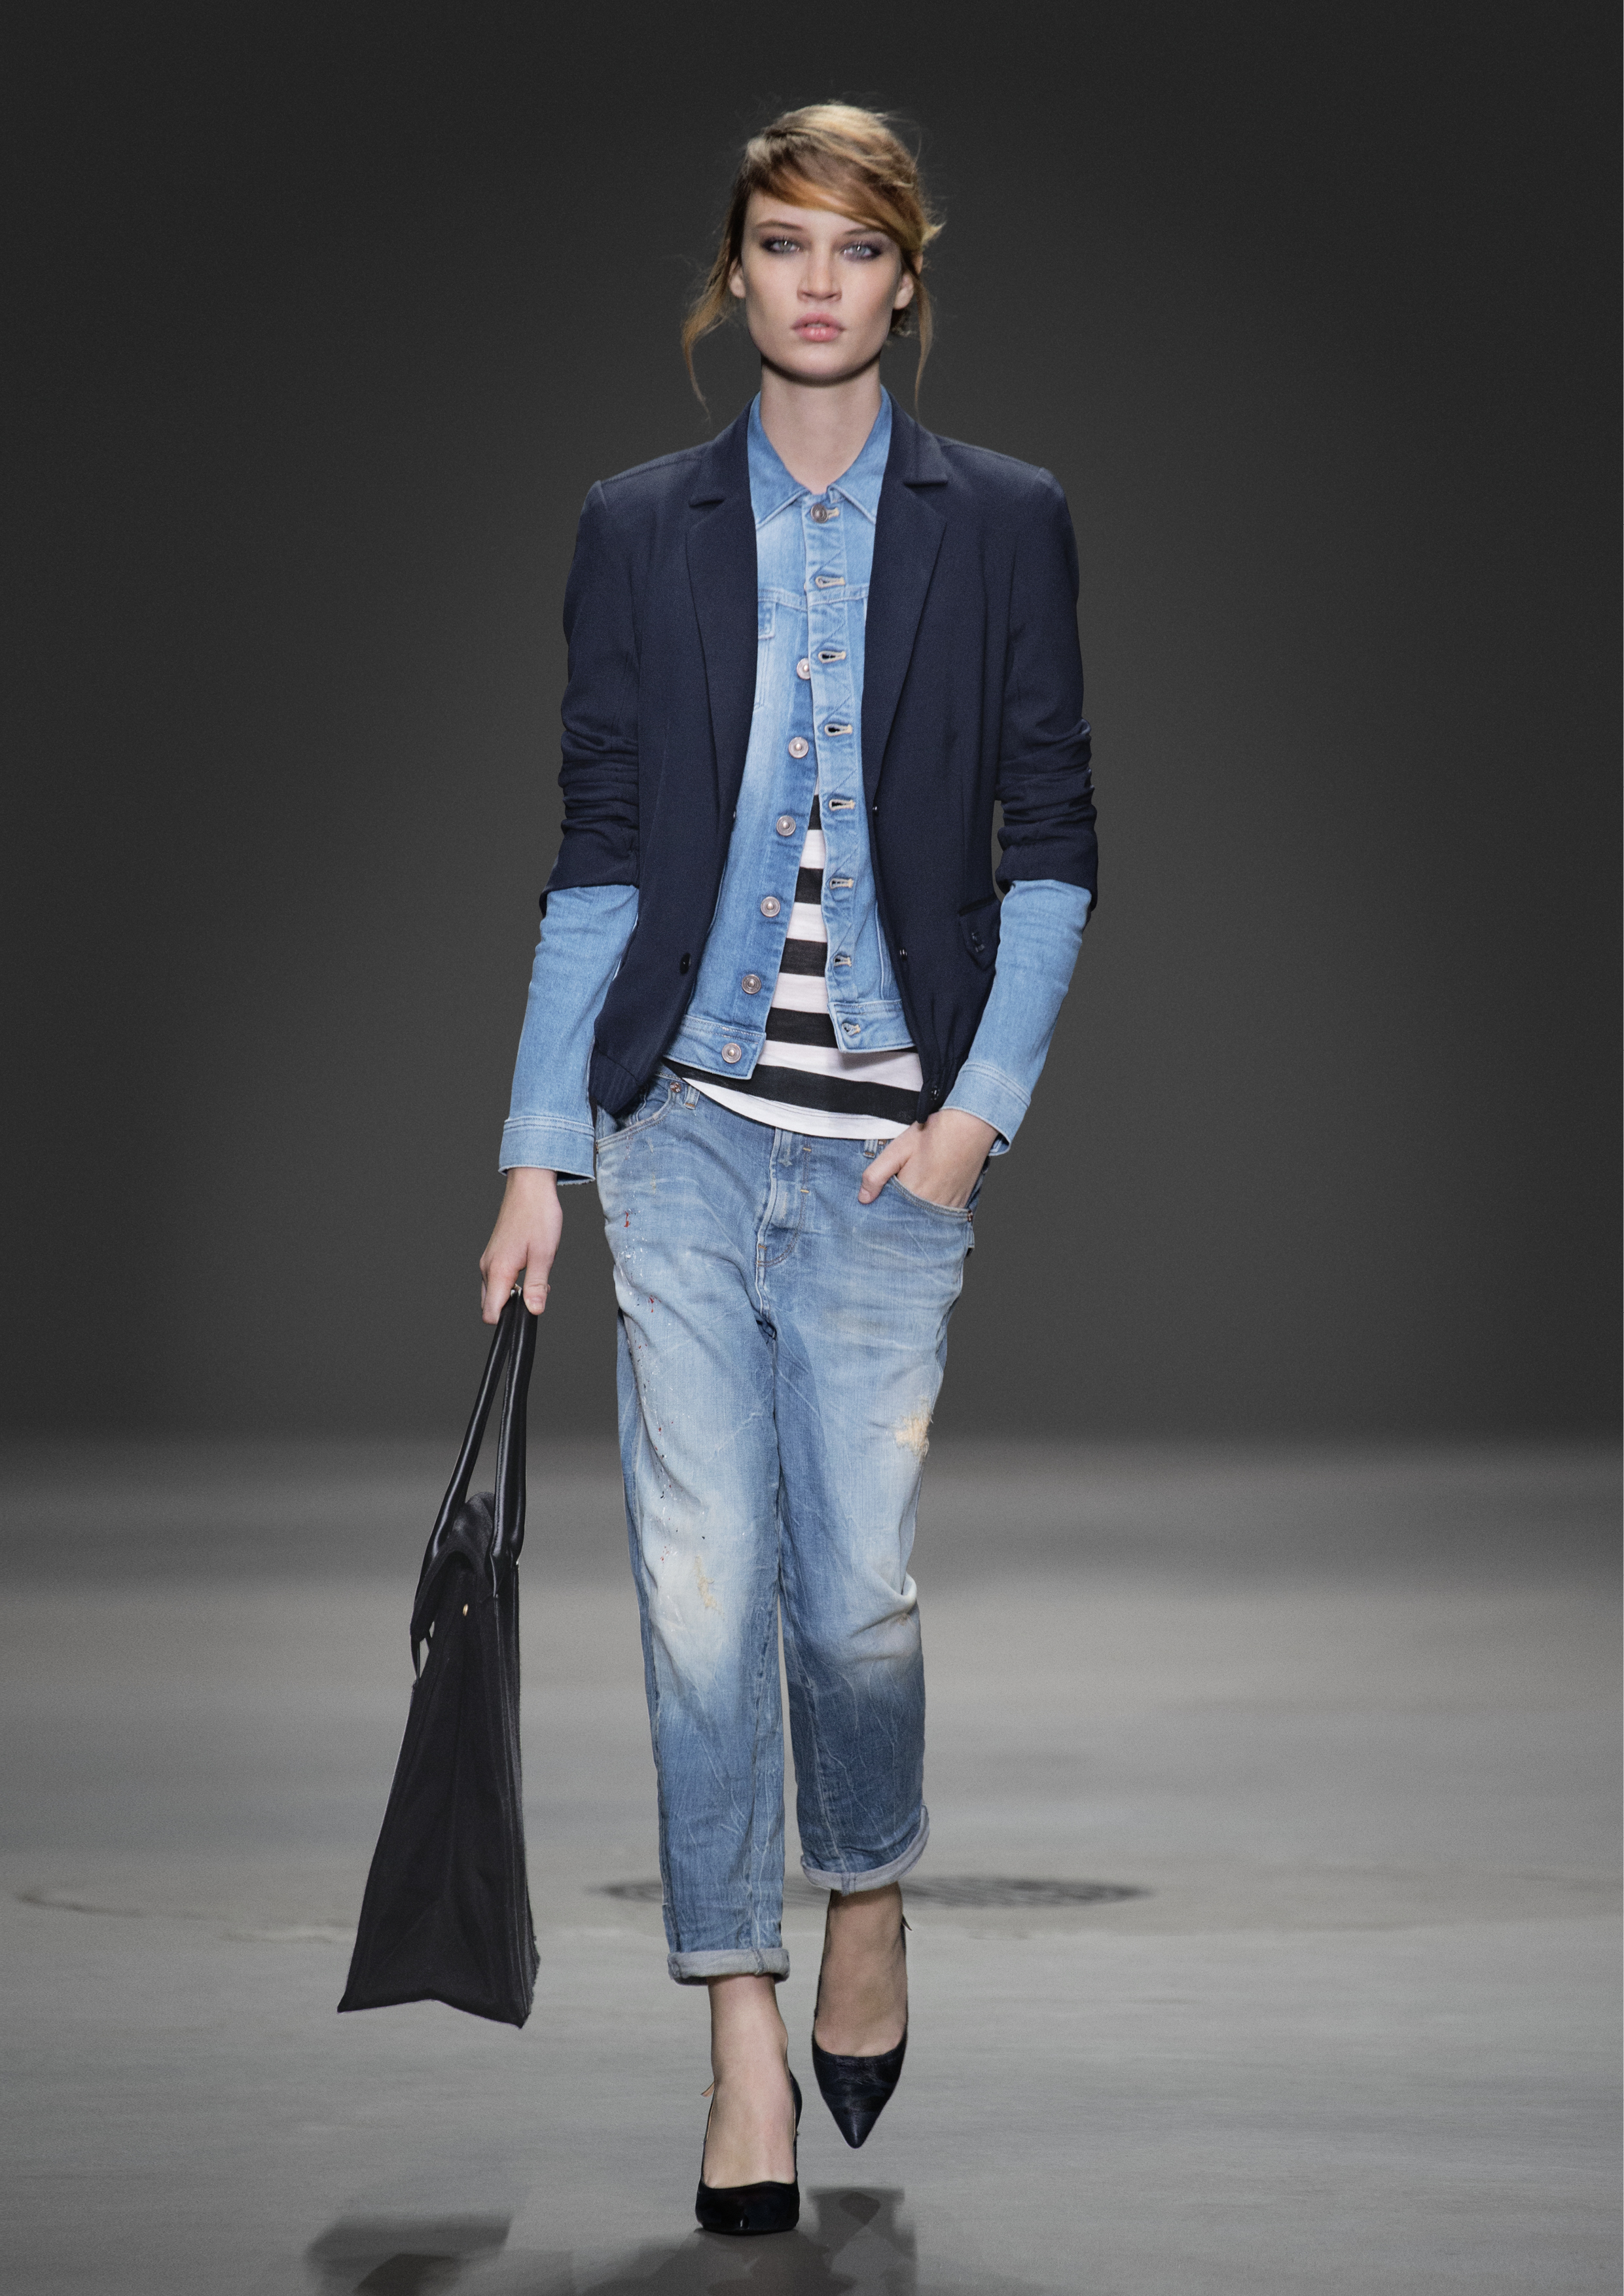 Denim and Jeans For Women - 2014 Fashion Trends (1)